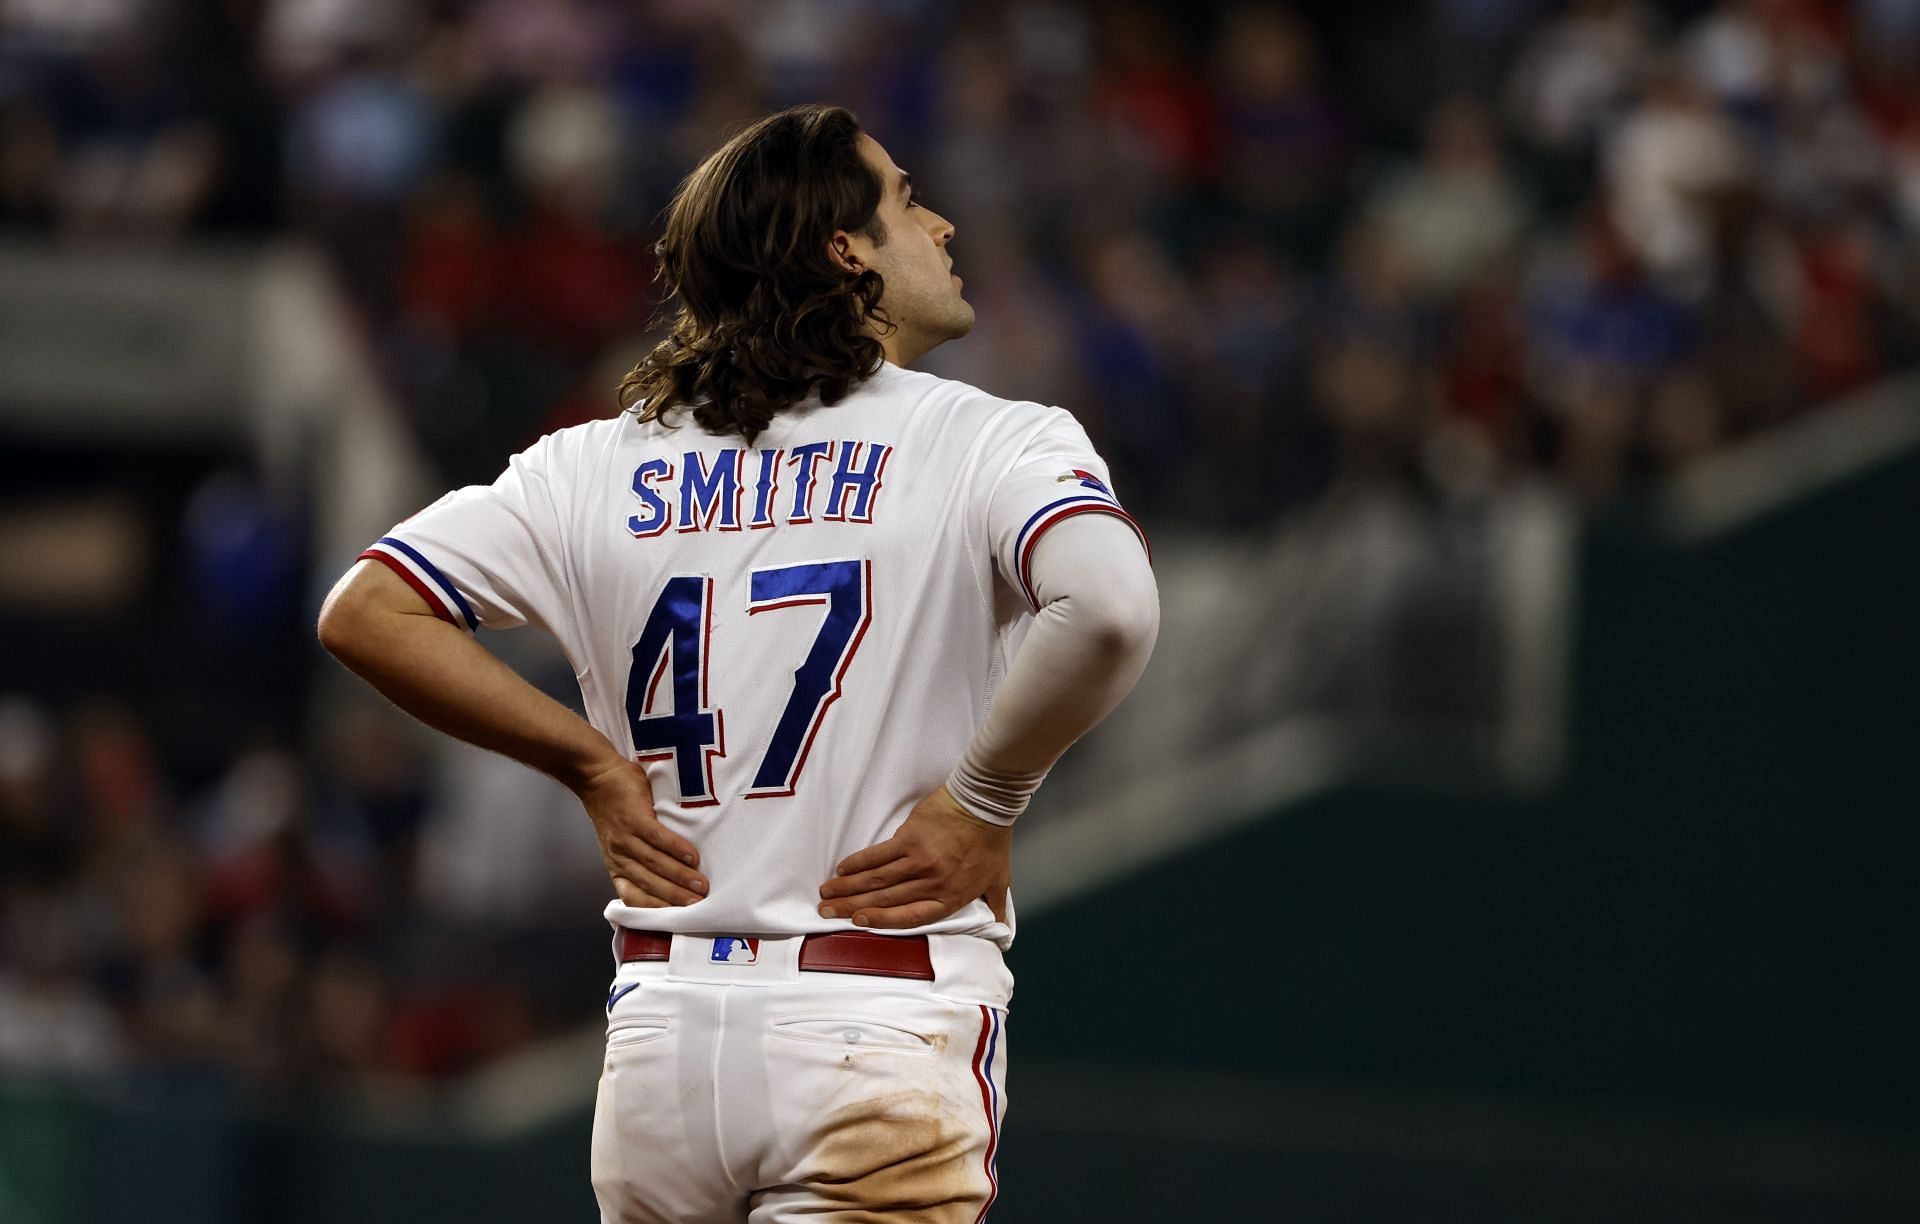 What happened to Josh Smith? Texas Rangers player rushed to hospital after  nasty blow to face